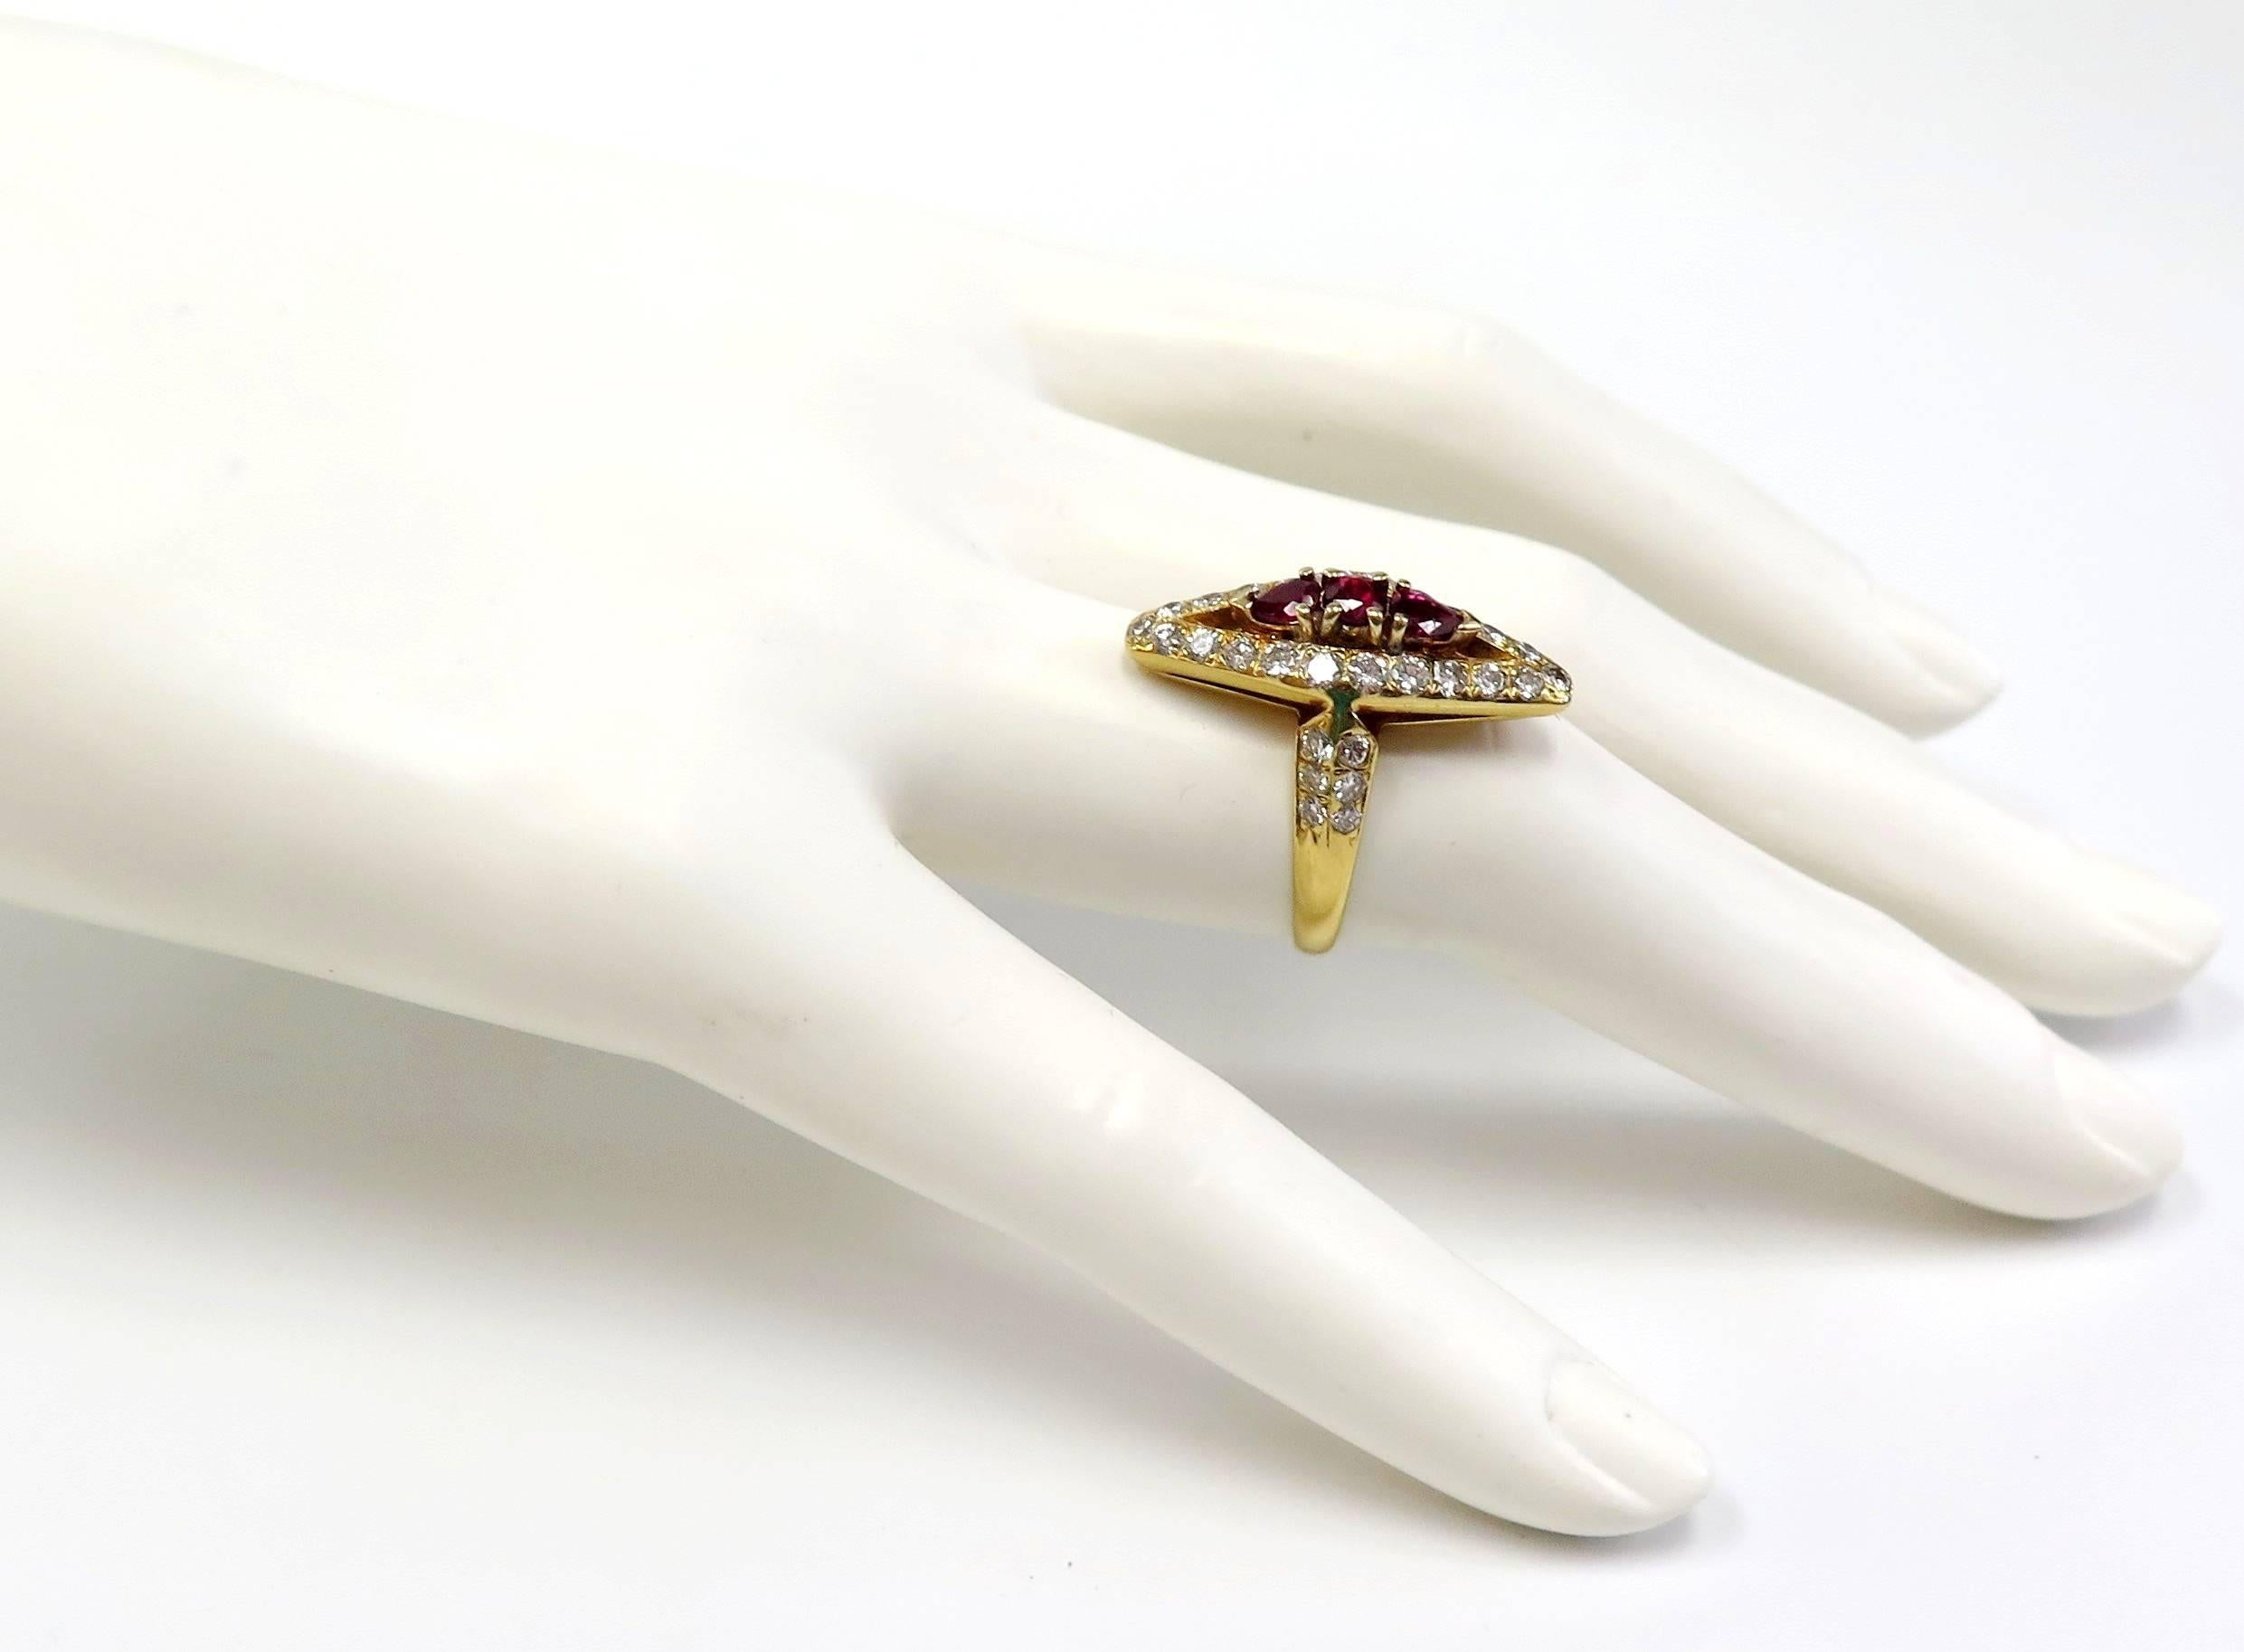 This 1 inch long dinner ring is all lit up with 1.50 Carats of bright-white diamond sparklers enveloping 3 rich vibrant rubies. This 1960s elongated navette-shaped ring is beautifully crafted in 18 Karat yellow gold.  A dramatic vintage